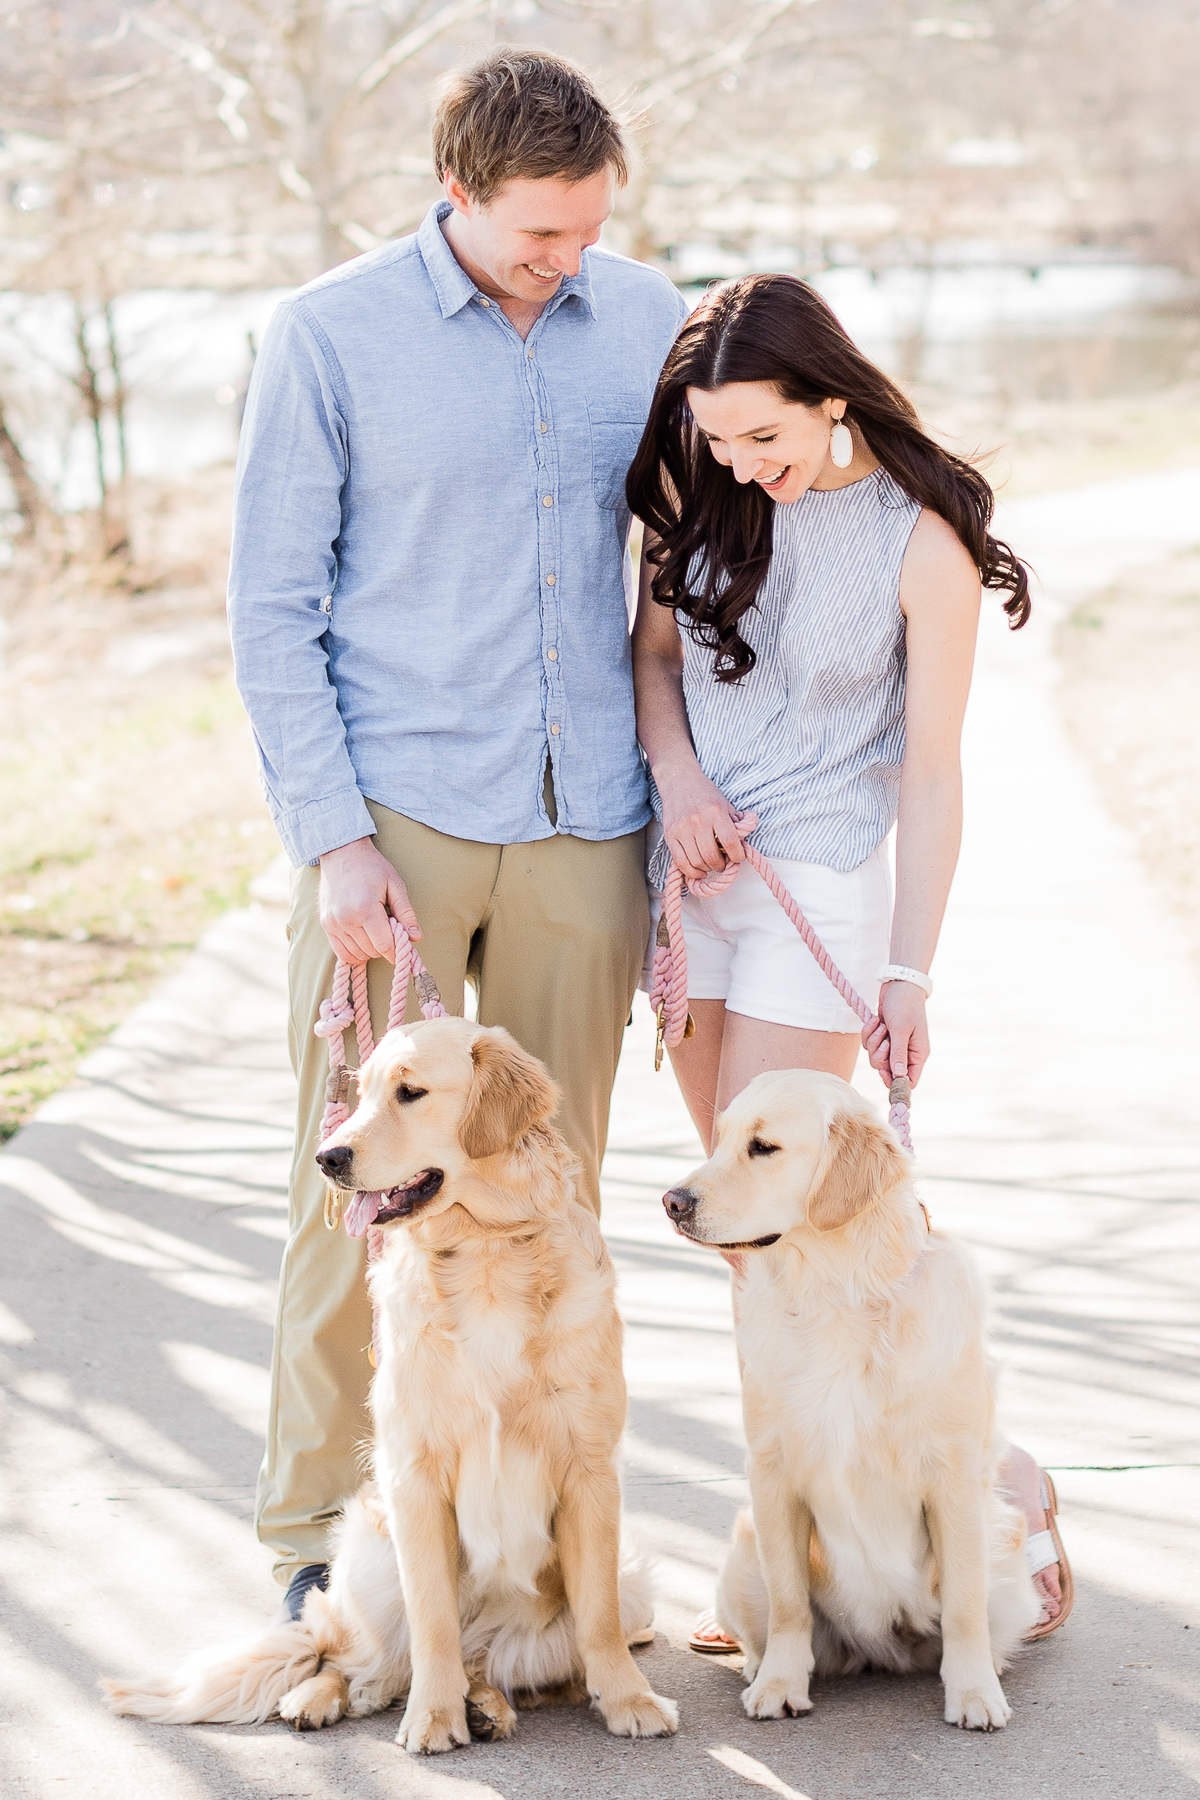 How to Keep Your Dogs Flea and Tick Free: A PetArmor Plus Review by popular southern lifestyle blogger Stephanie Ziajka from Diary of a Debutante, PetArmor Plus for Dogs review, PetArmor Plus reviews, PetArmor Plus for Dogs at PetSmart, cute golden retriever puppies